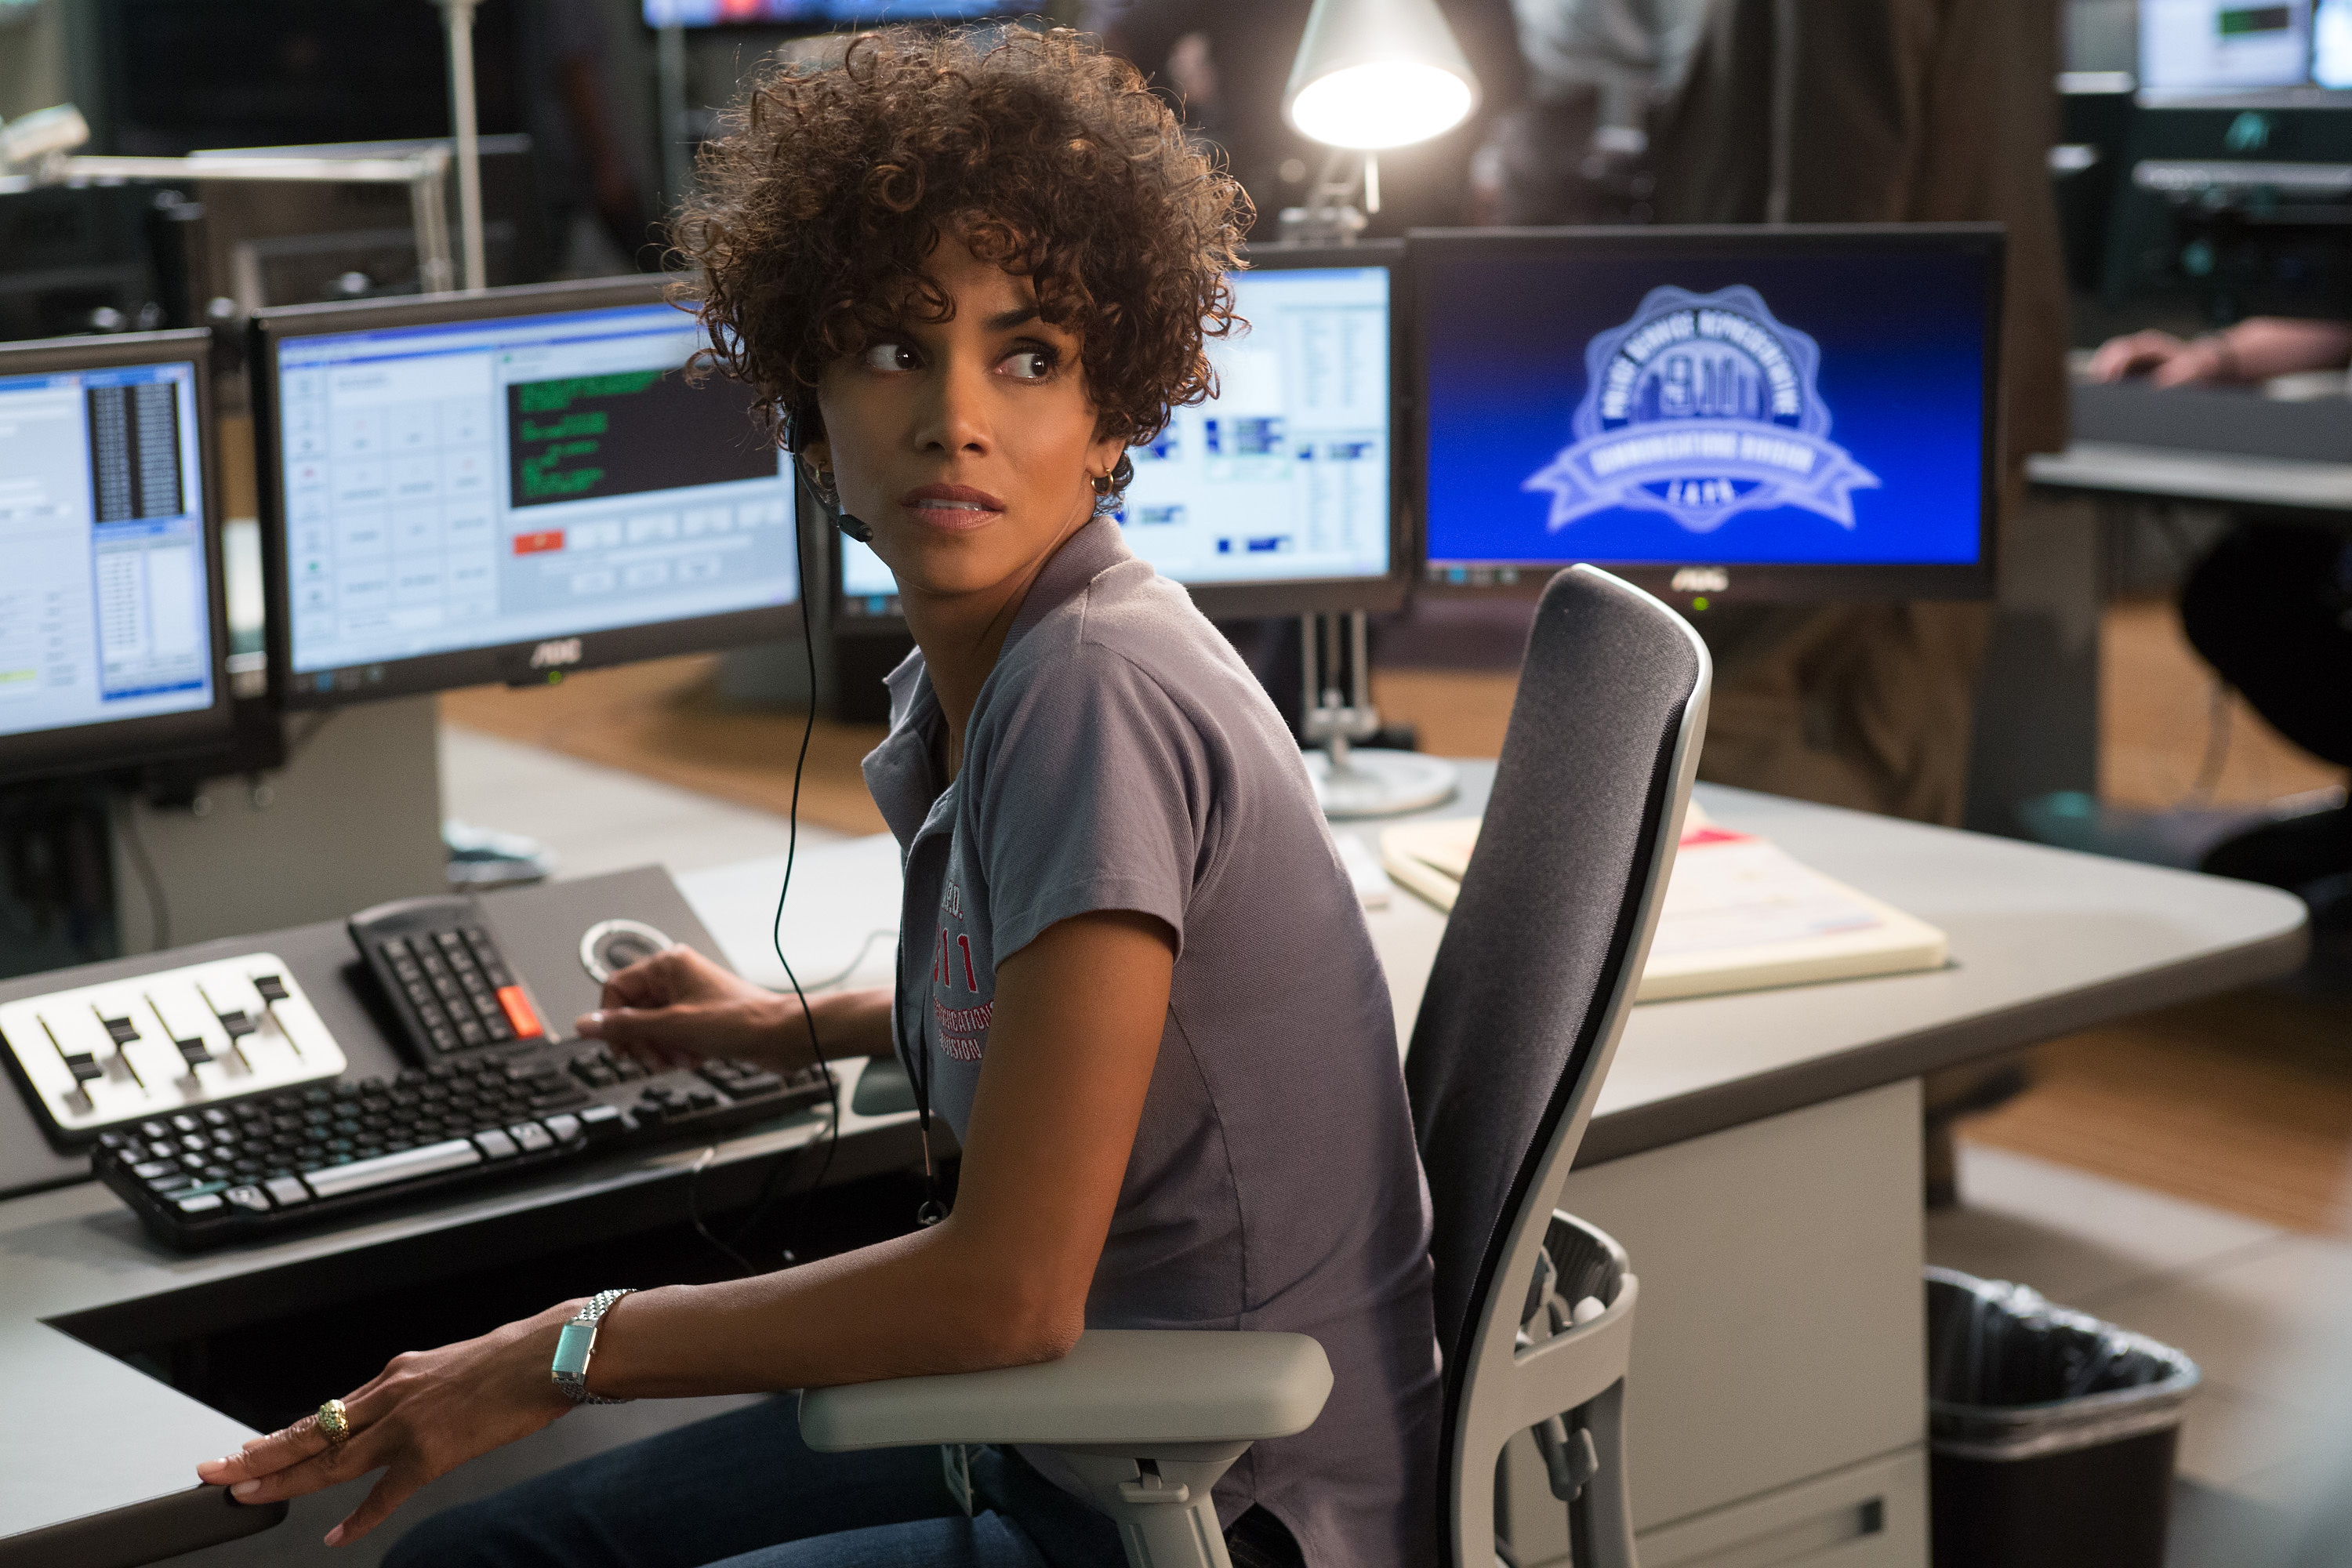 Jordan Turner (Halle Berry) takes a 9-1-1 call from kidnap victim Casey Welson (Abigail Breslin). Photo courtesy Sony Pictures